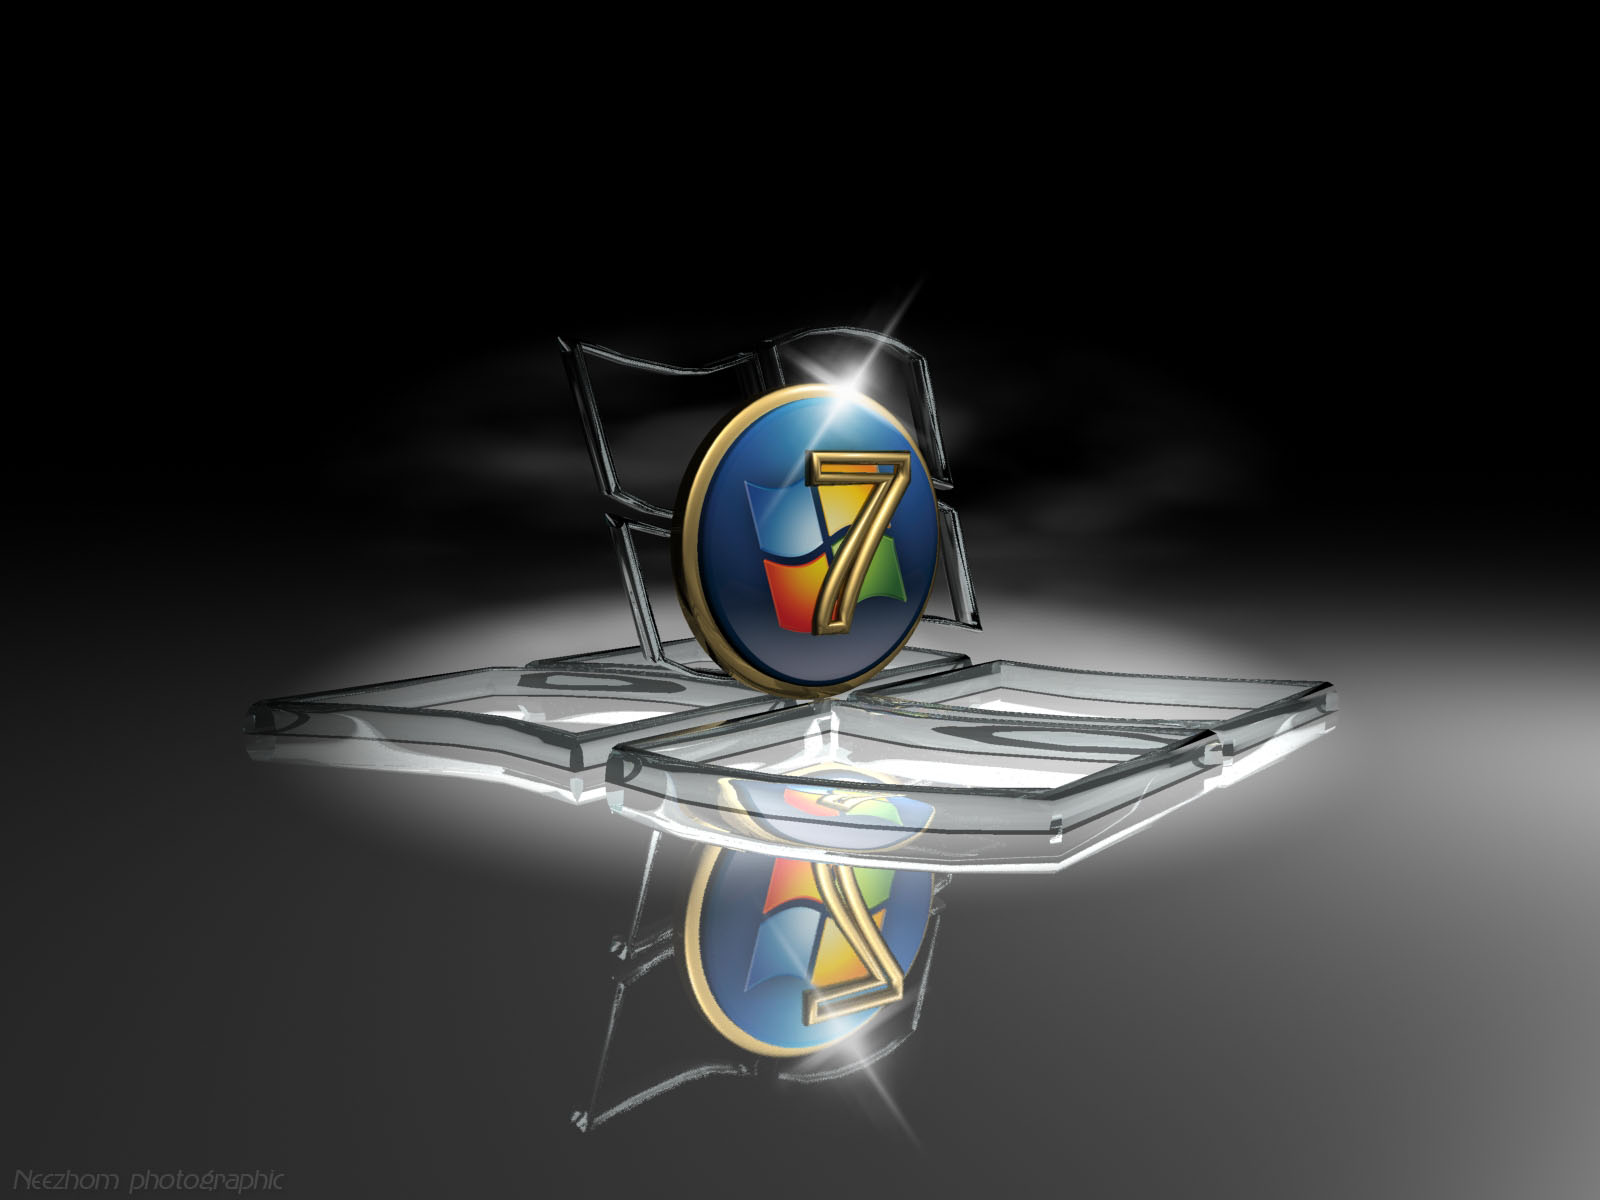 3d Live Wallpapers For Pc Windows 7 Black Windows 7 Hd Wallpapers